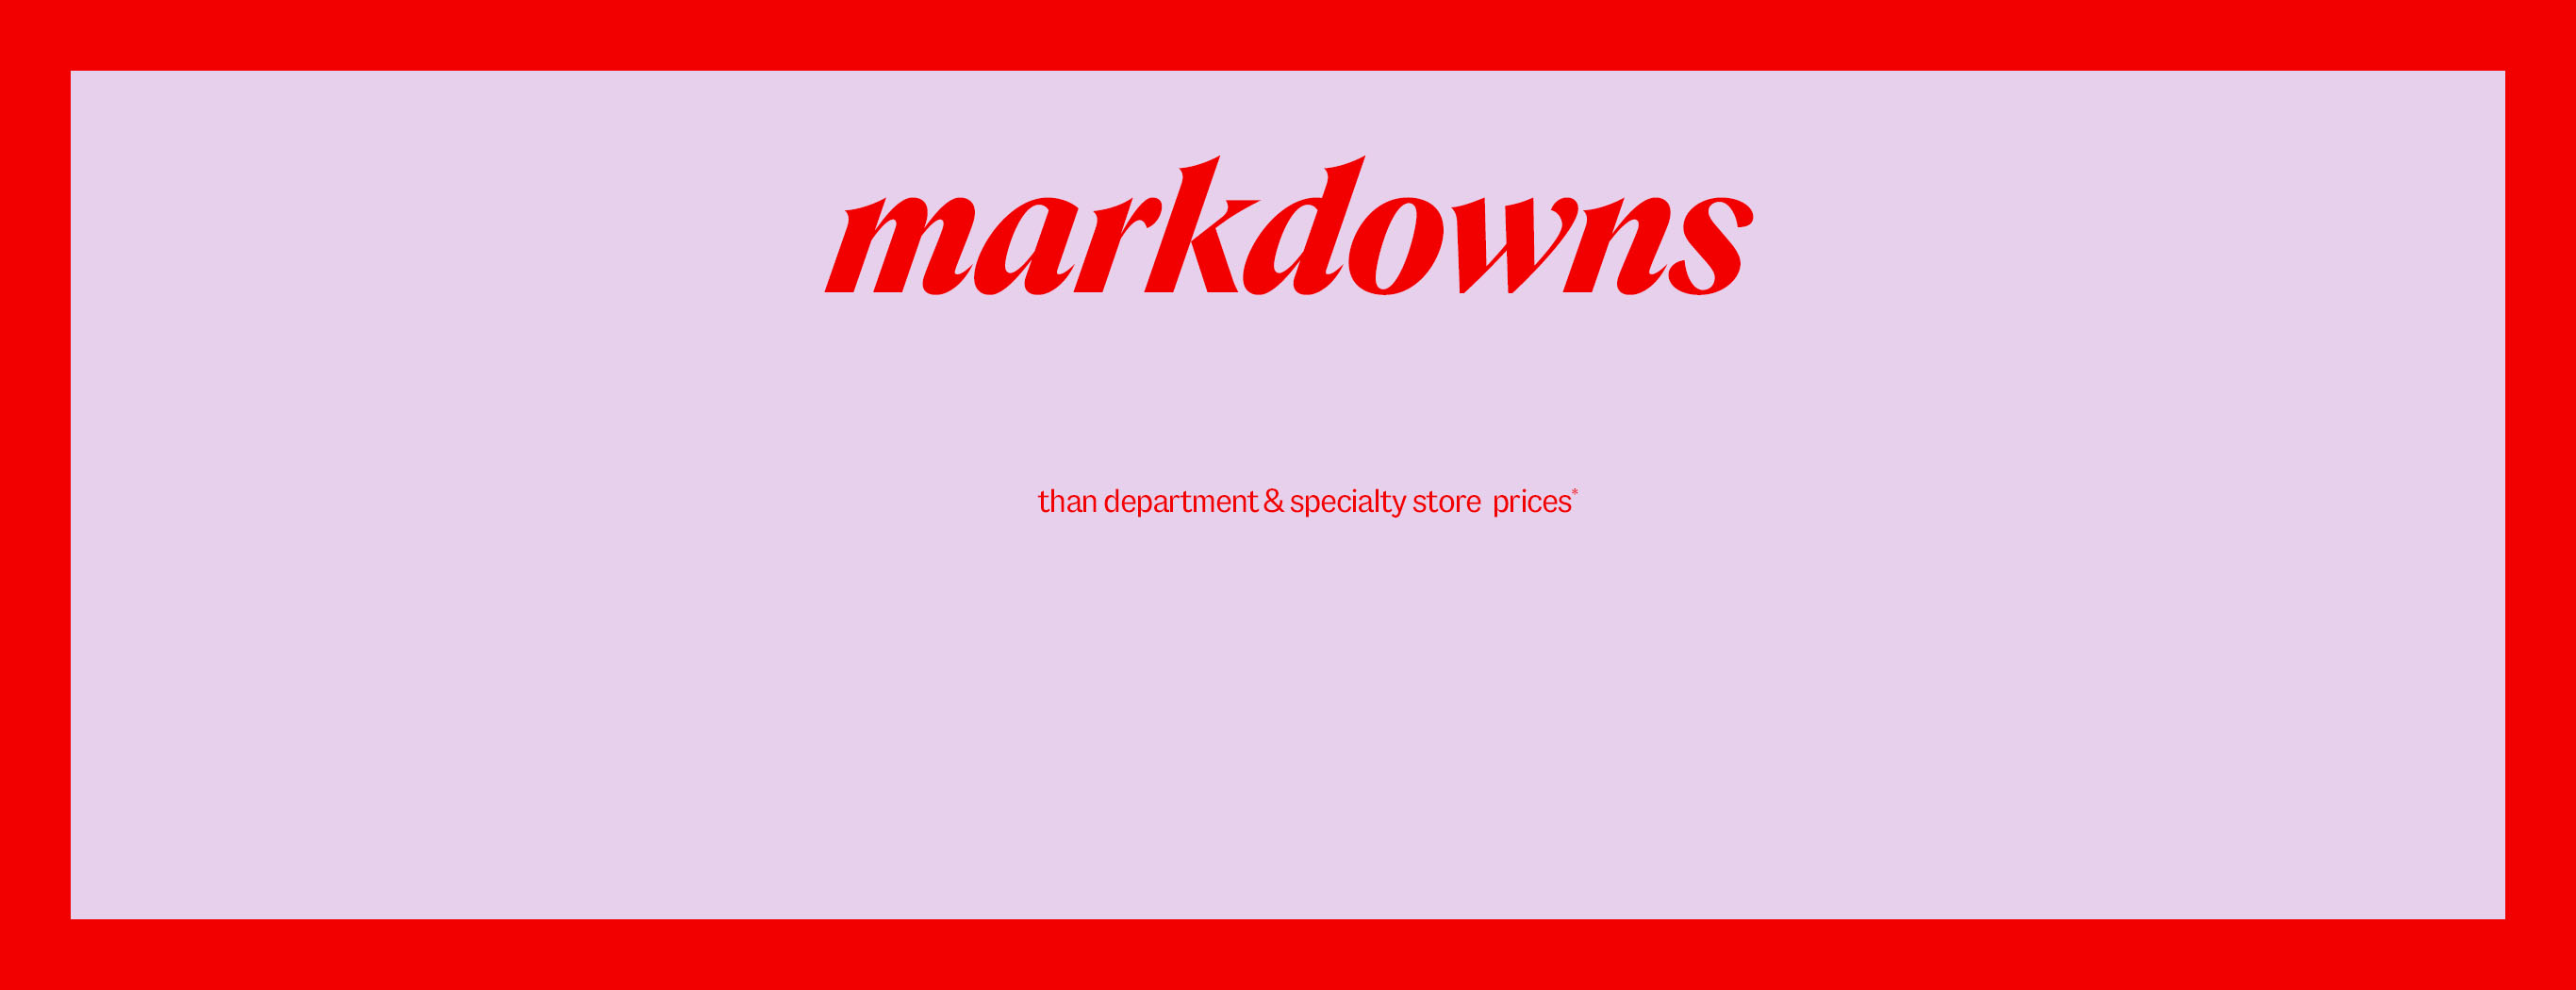 Markdowns ... less vs. department & specialty store prices*